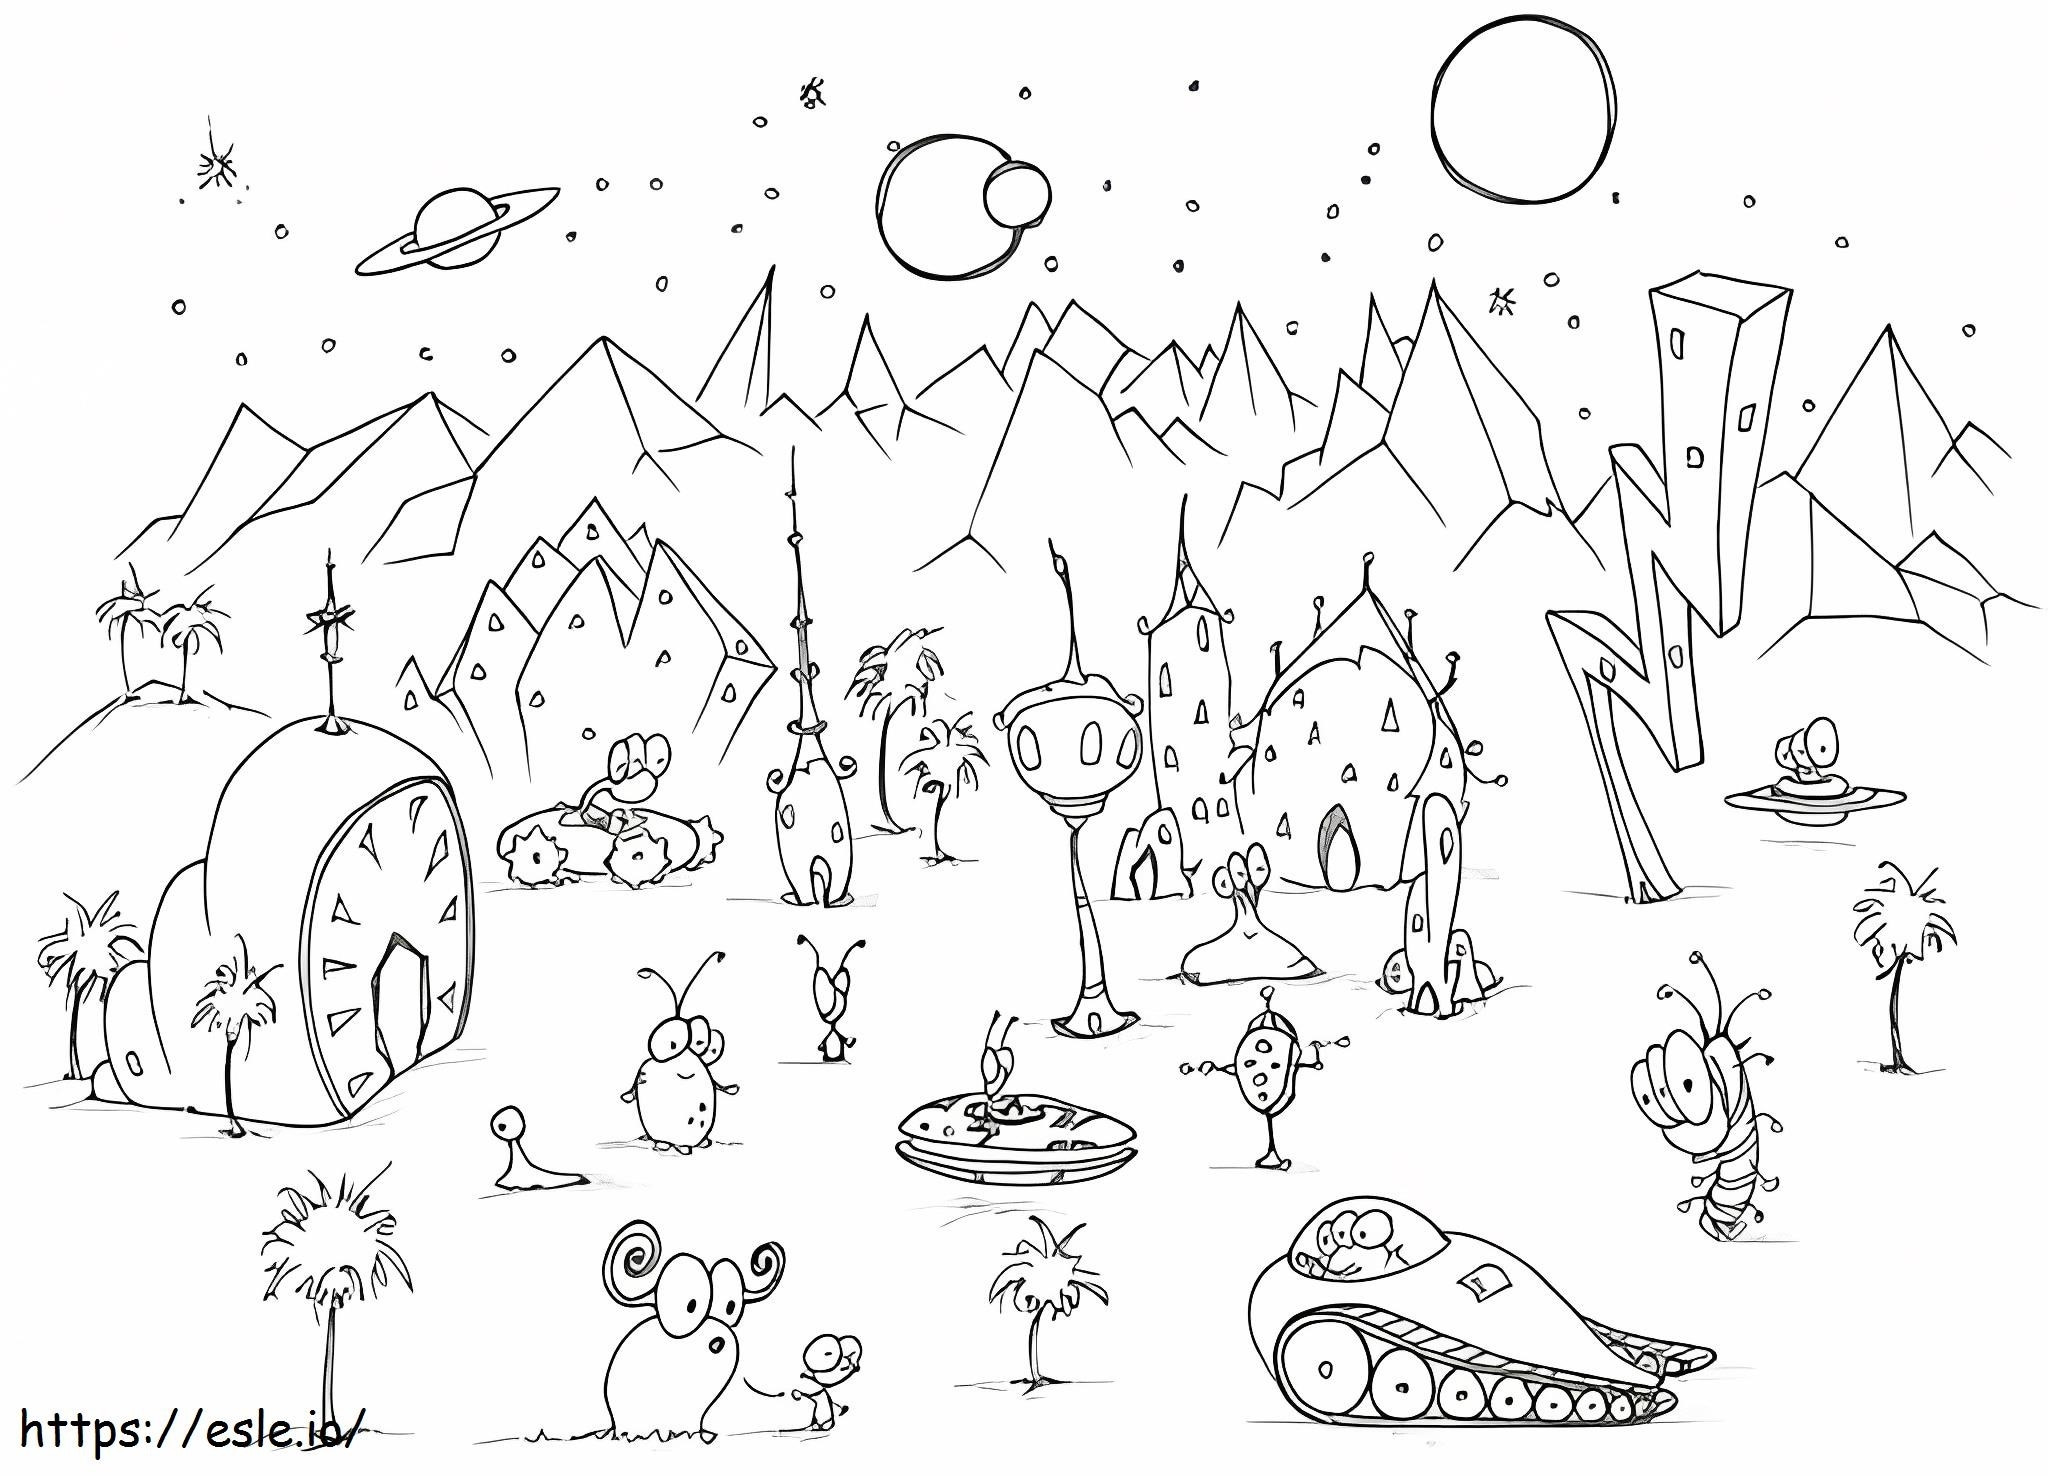 Some Aliens On An Alien Planet coloring page